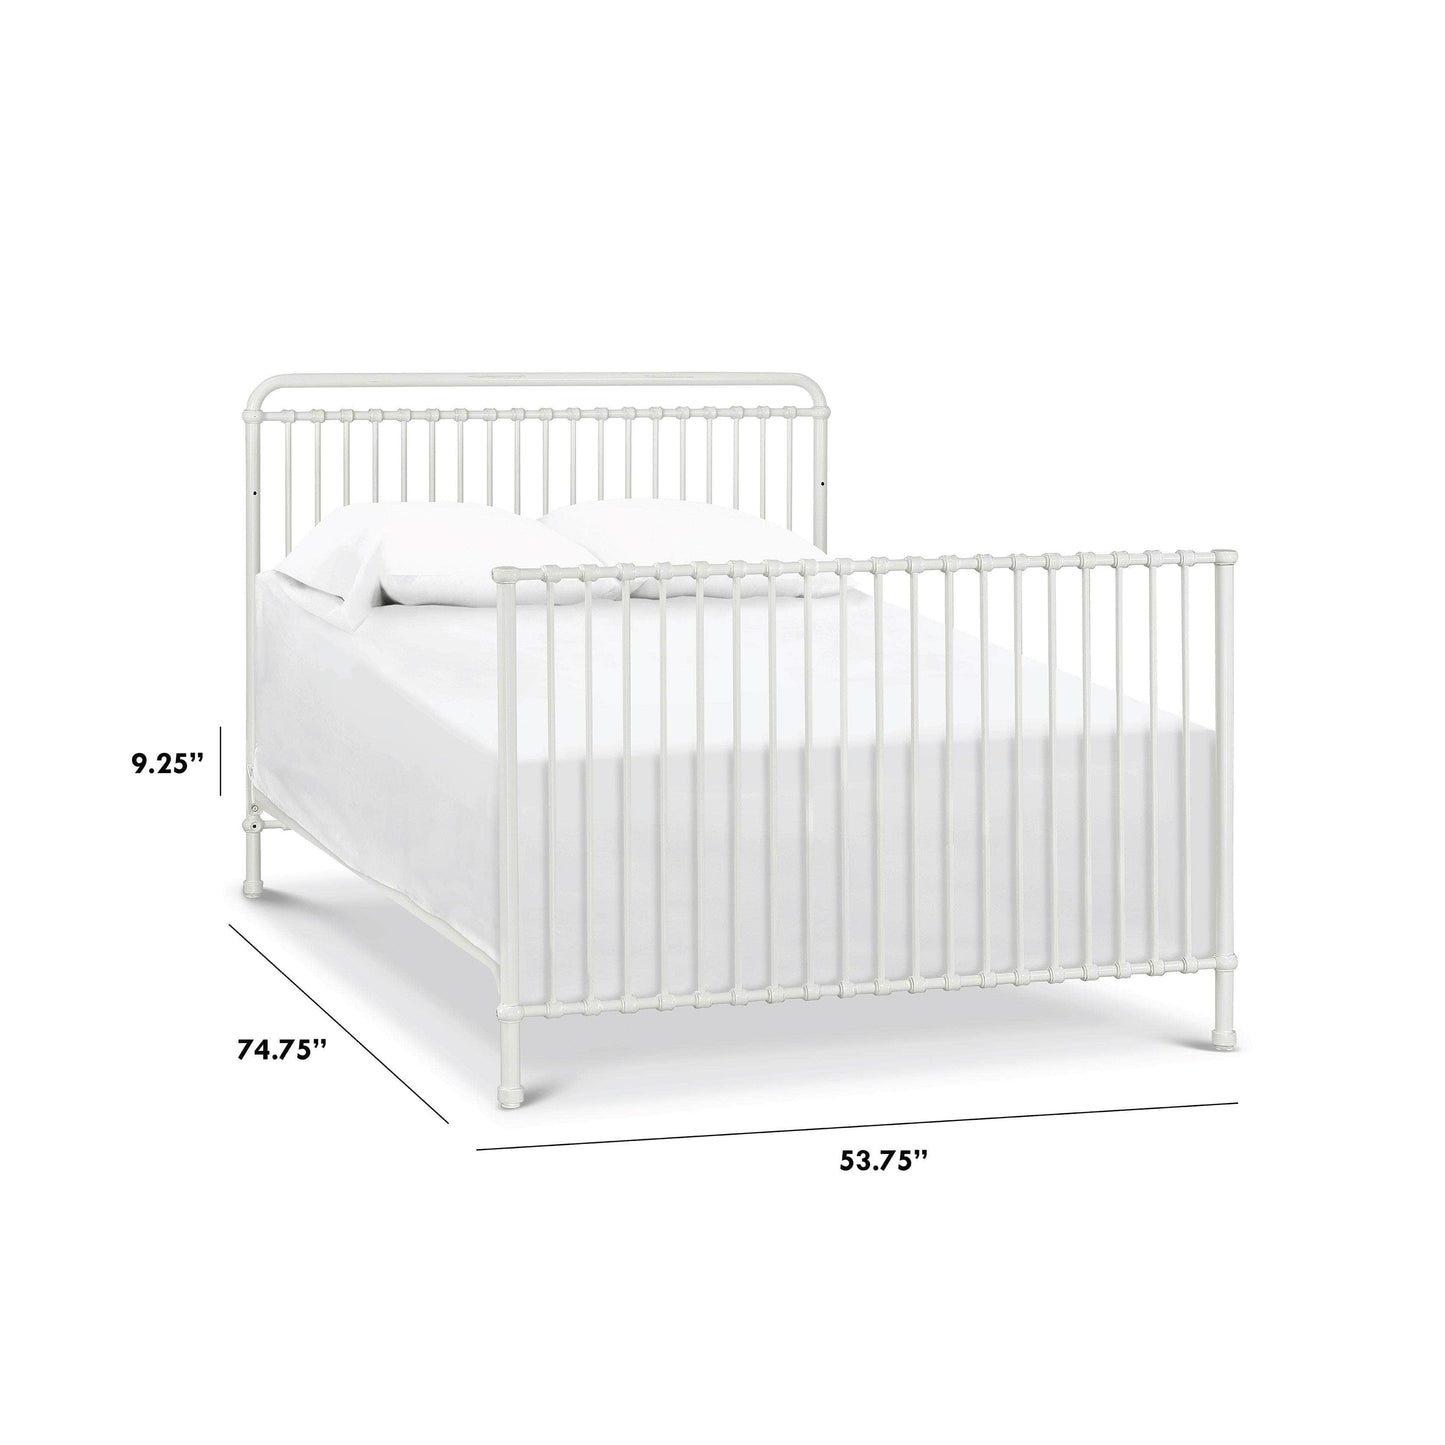 B15399WX,Winston Full Size Bed Conversion Kit in Washed White Finish